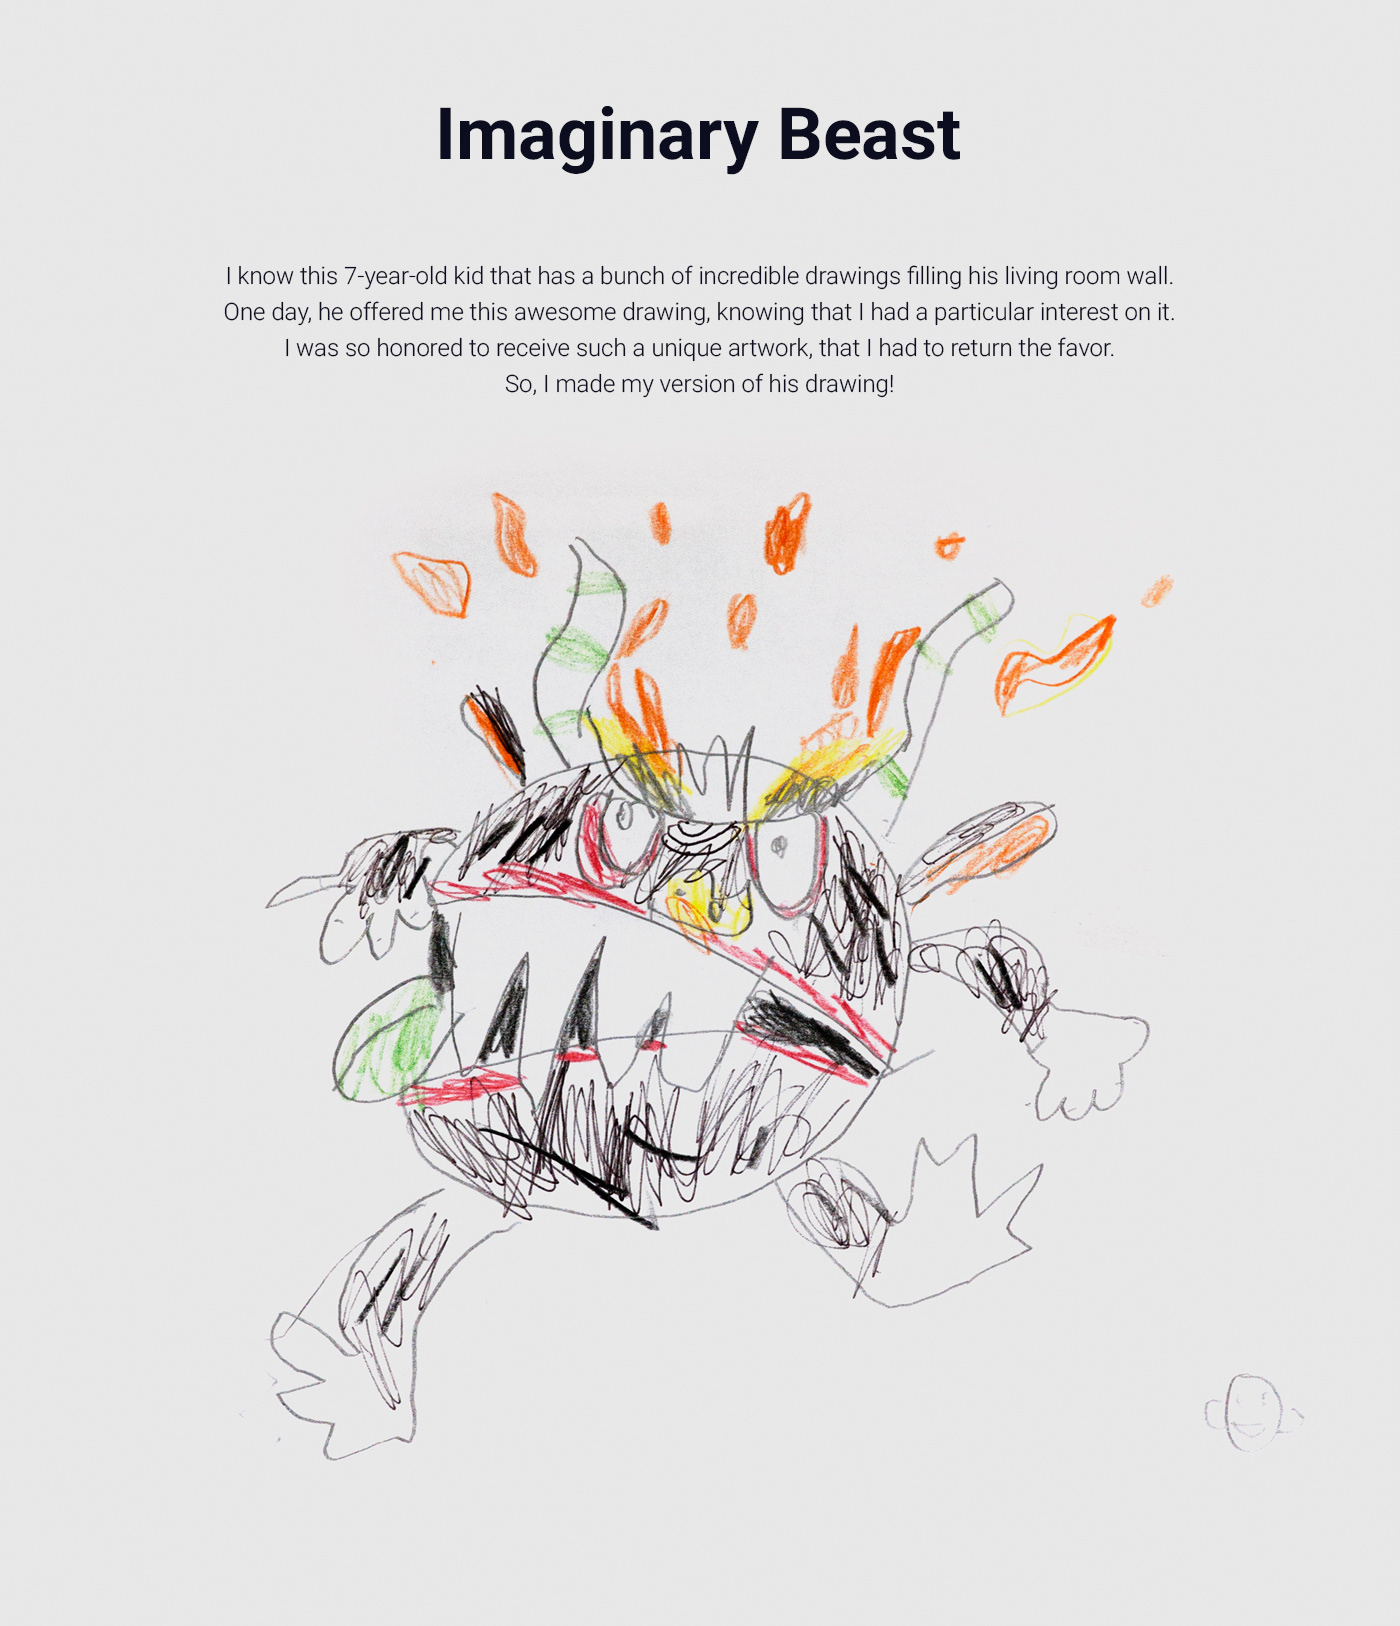 beast imaginary sketch ILLUSTRATION  monster animal monkey fire creative angry